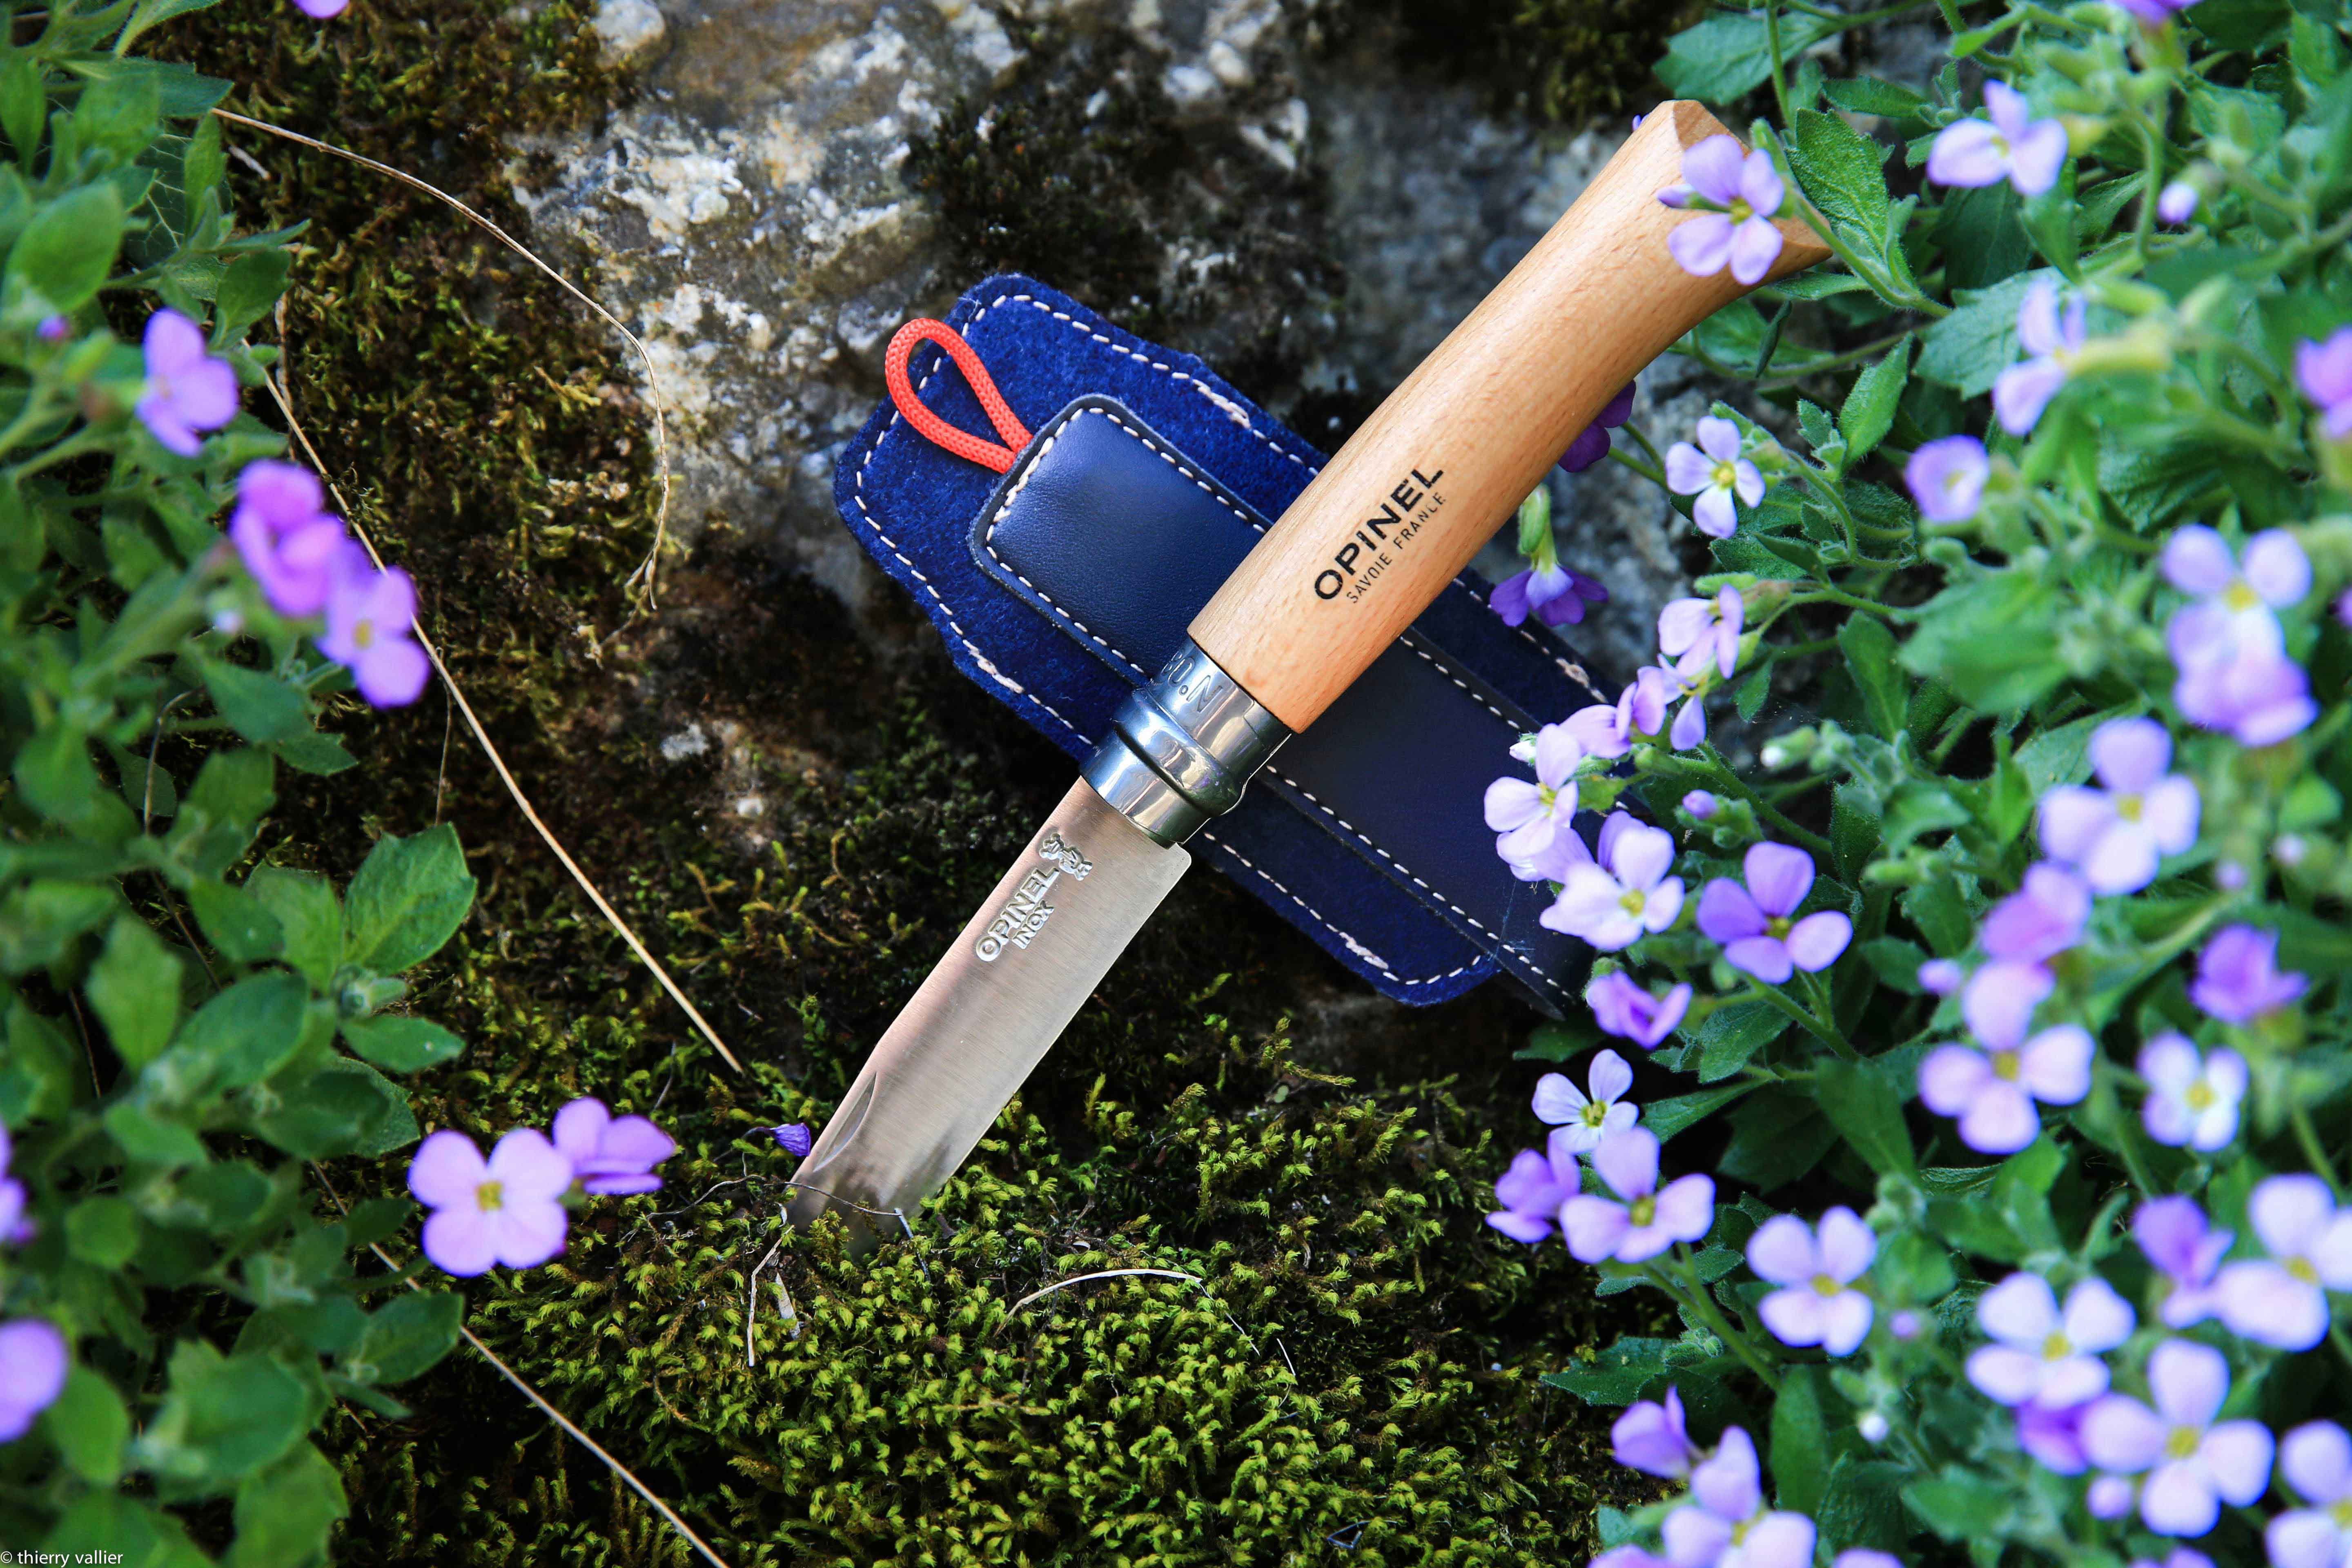 Sheaths Opinel knives outdoor chic alpine leather